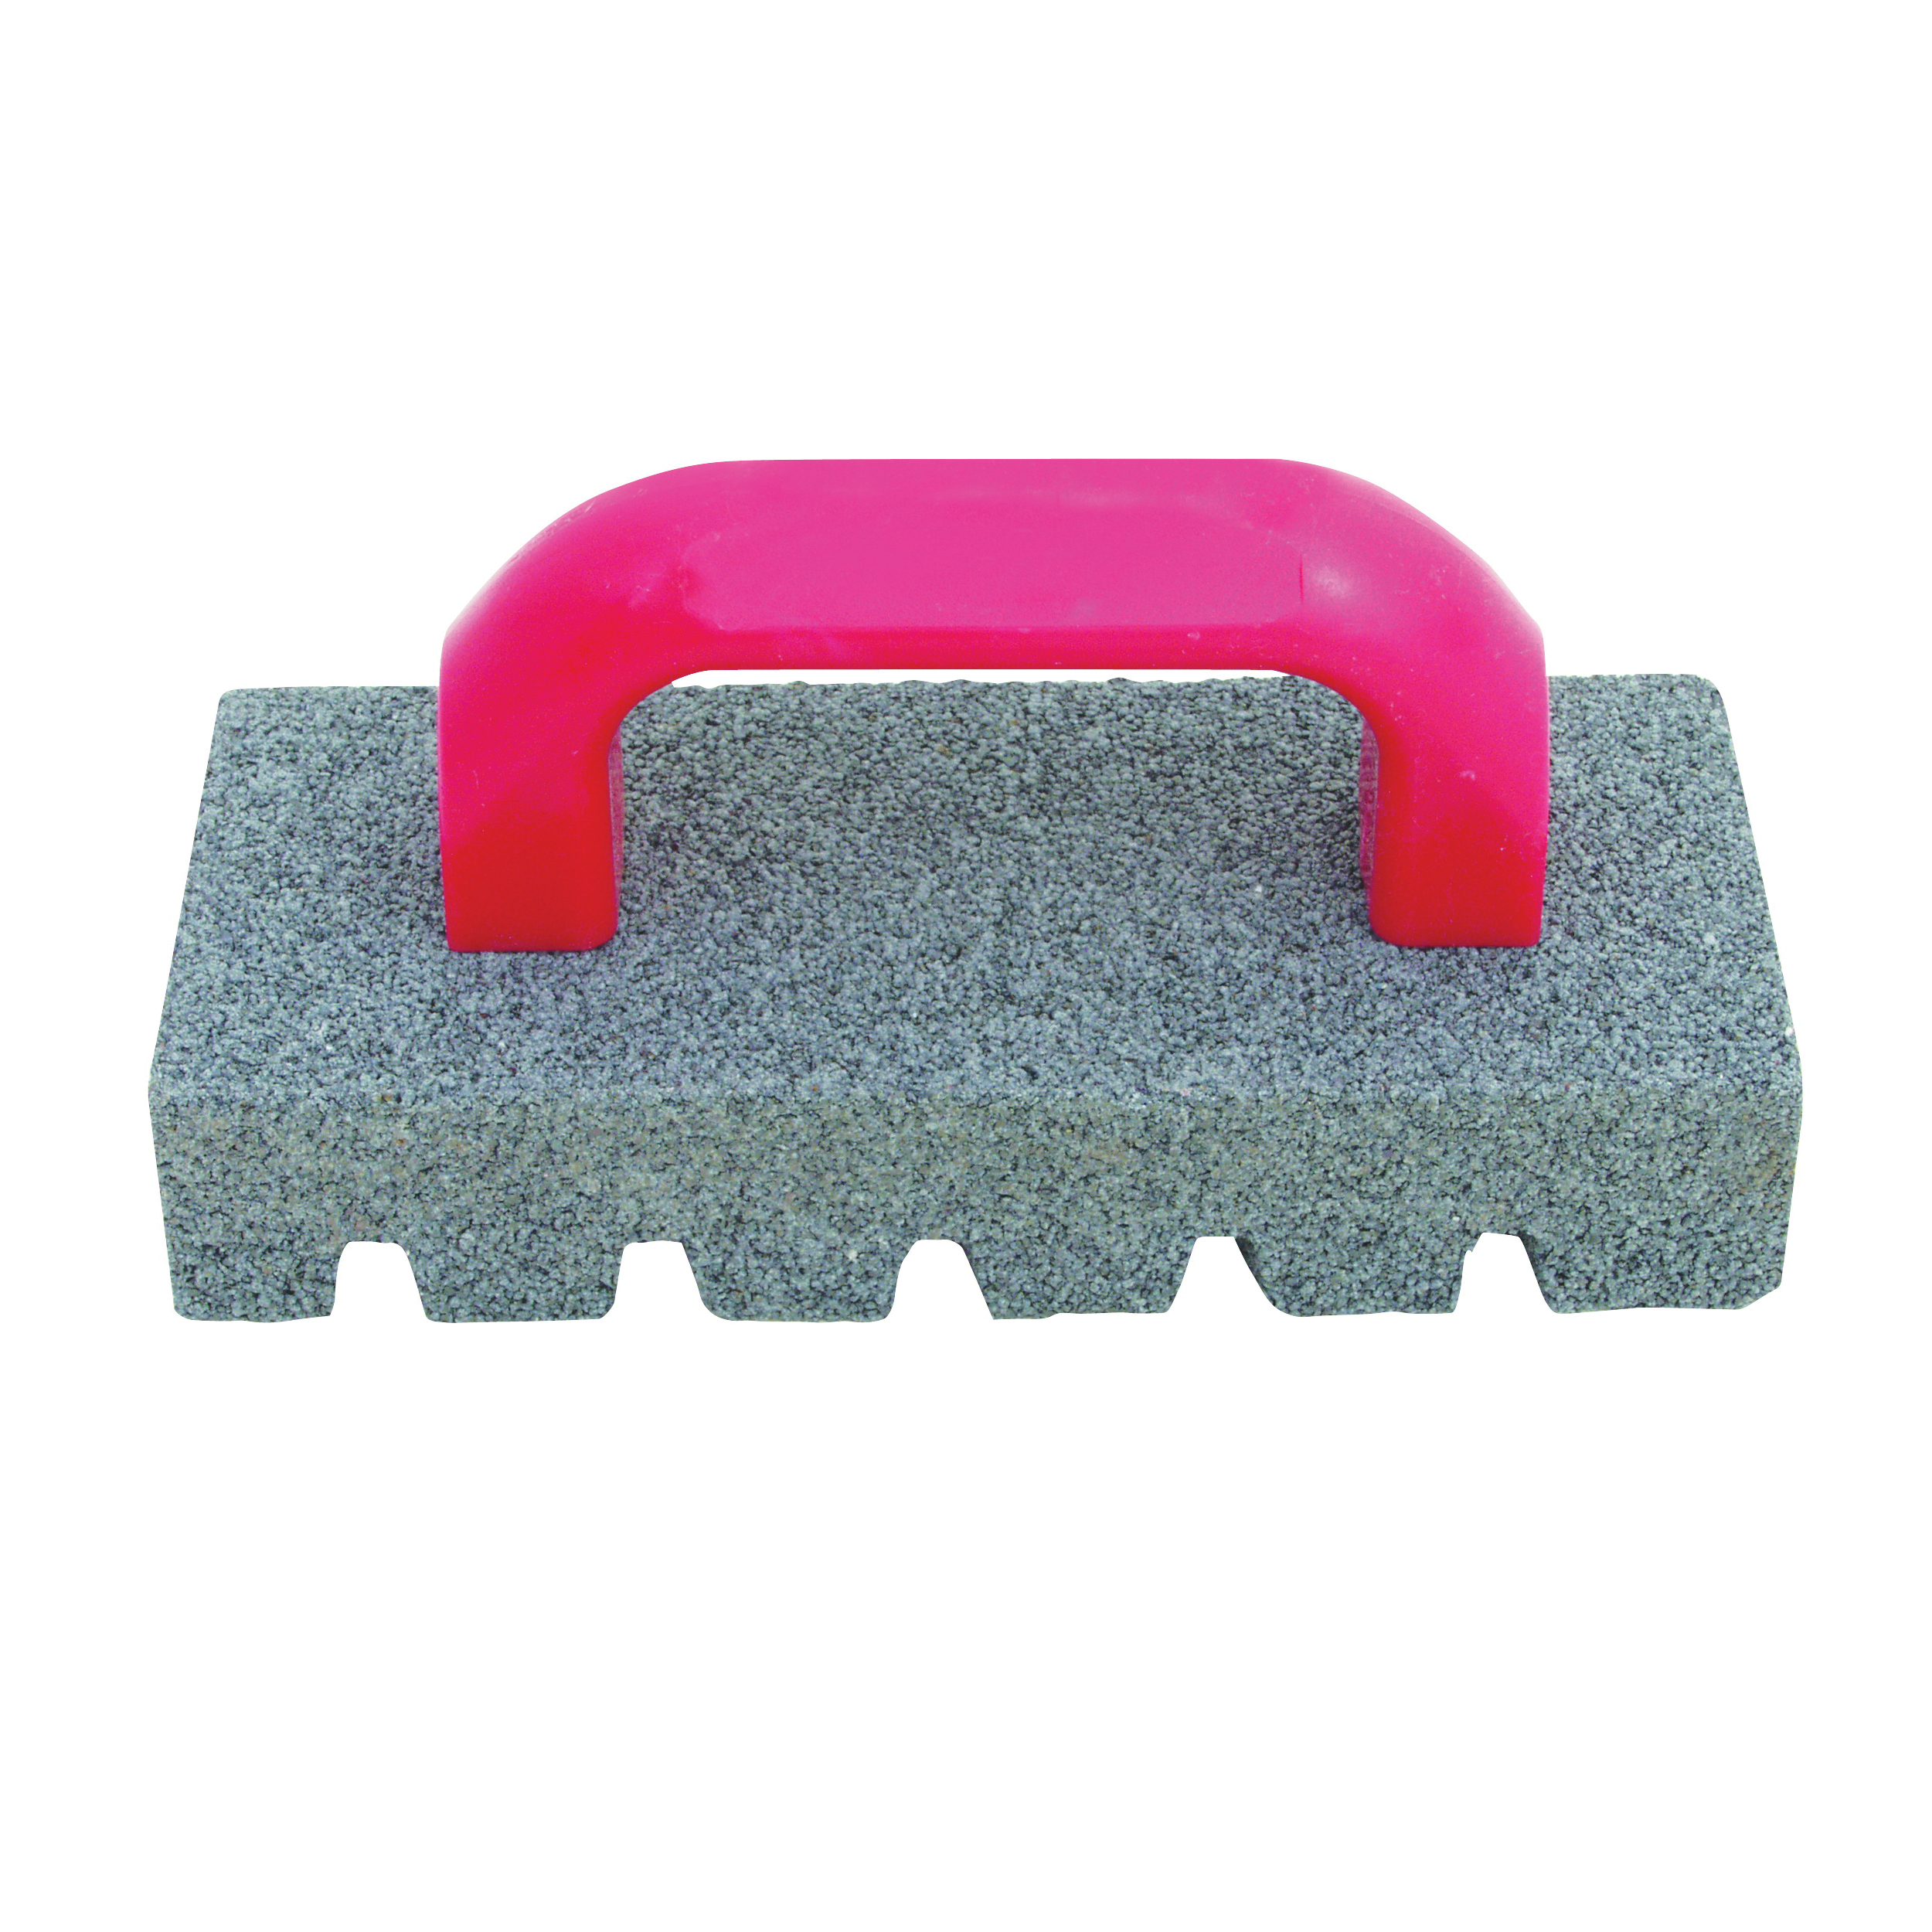 87795 Rubbing Brick, 1-1/2 in Thick Blade, 6 to 120 Grit, Extra Coarse, Silicone Carbide Abrasive